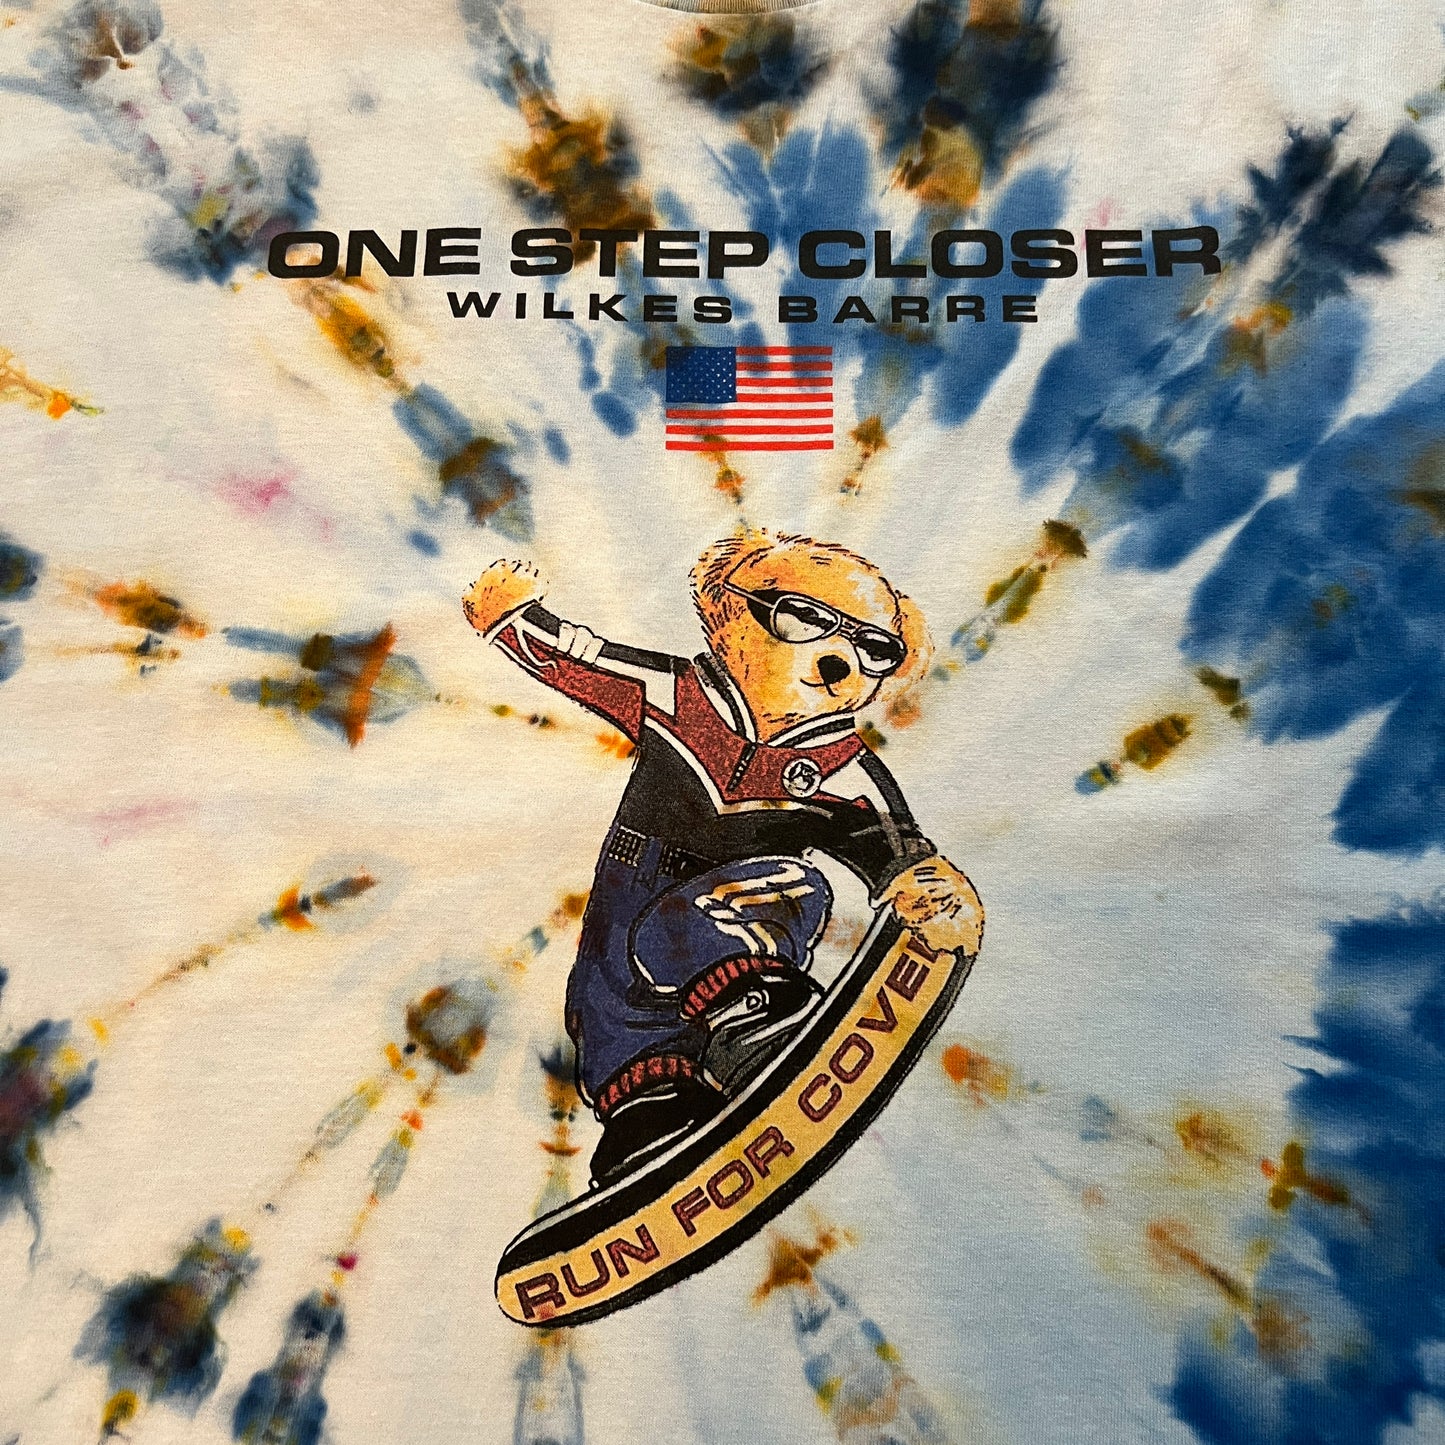 One Step Closer Band Run For Cover T-Shirt Tie-Dye Size Large Limited /15